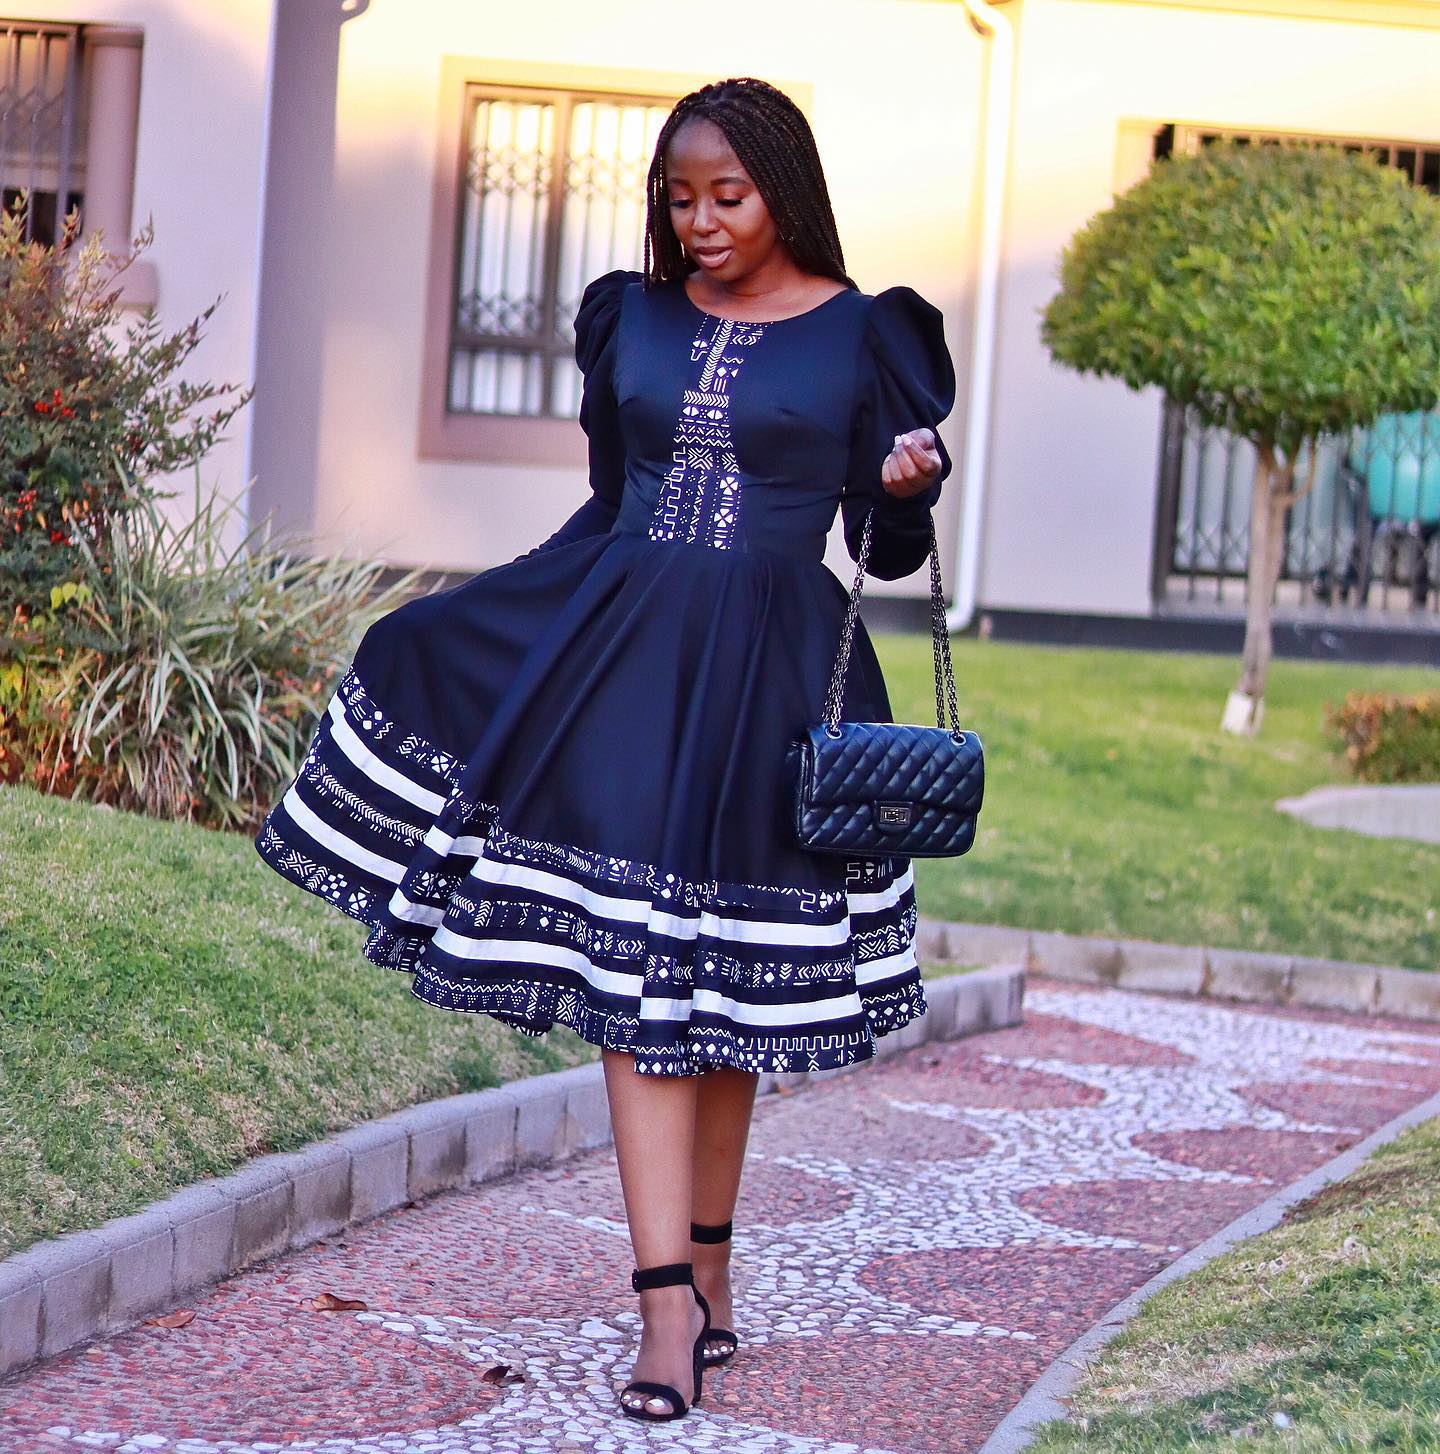 The Top Design of Xhosa Fashion in South Africa